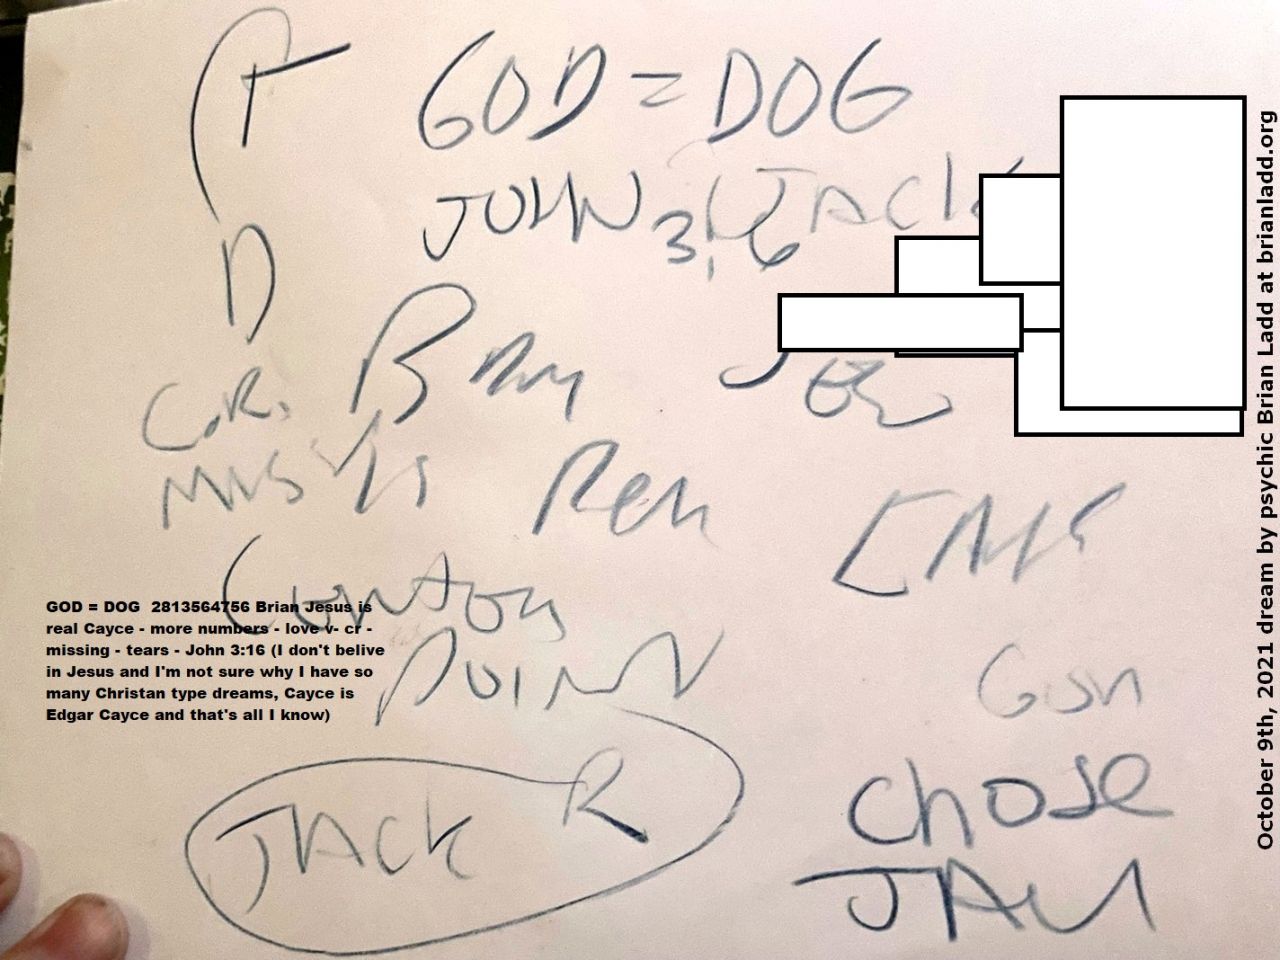 9 Oct 2021 9   GOD = DOG  2813564756 Brian Jesus is real Cayce - more numbers - love v- cr - missing - tears - John 3:16 (I don't believe in Jesus and I'm not sure why I have so many Christan type dreams, Cayce is Edgar Cayce and that's all
GOD = DOG  2813564756 Brian Jesus is real Cayce - more numbers - love v- cr - missing - tears - John 3:16 (I don't believe in Jesus and I'm not sure why I have so many Christan type dreams, Cayce is Edgar Cayce and that's all I know)

